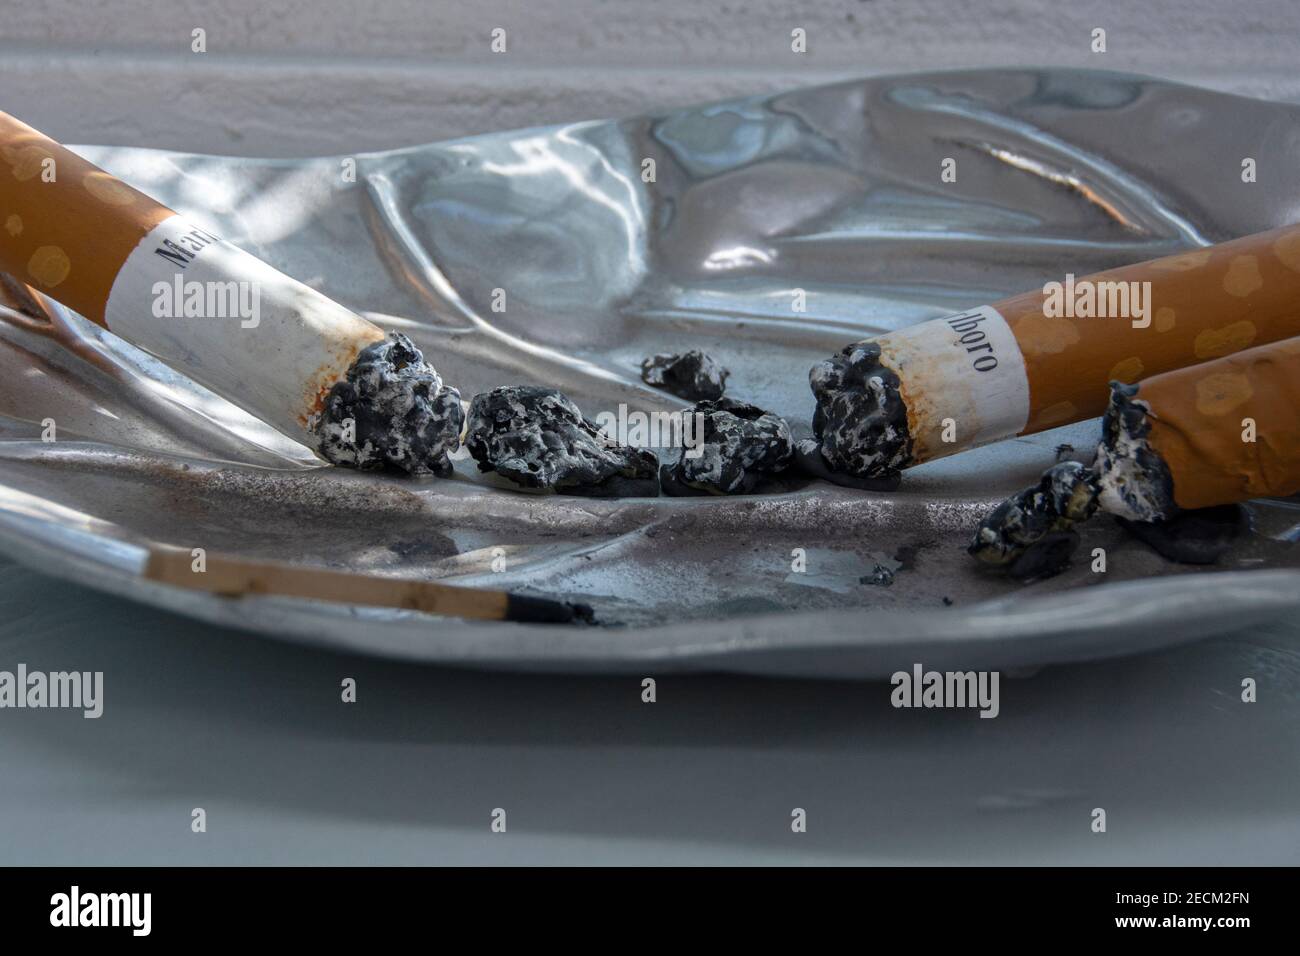 A close-up image of a Marlboro cigarette laying in an ashtray. Stock Photo